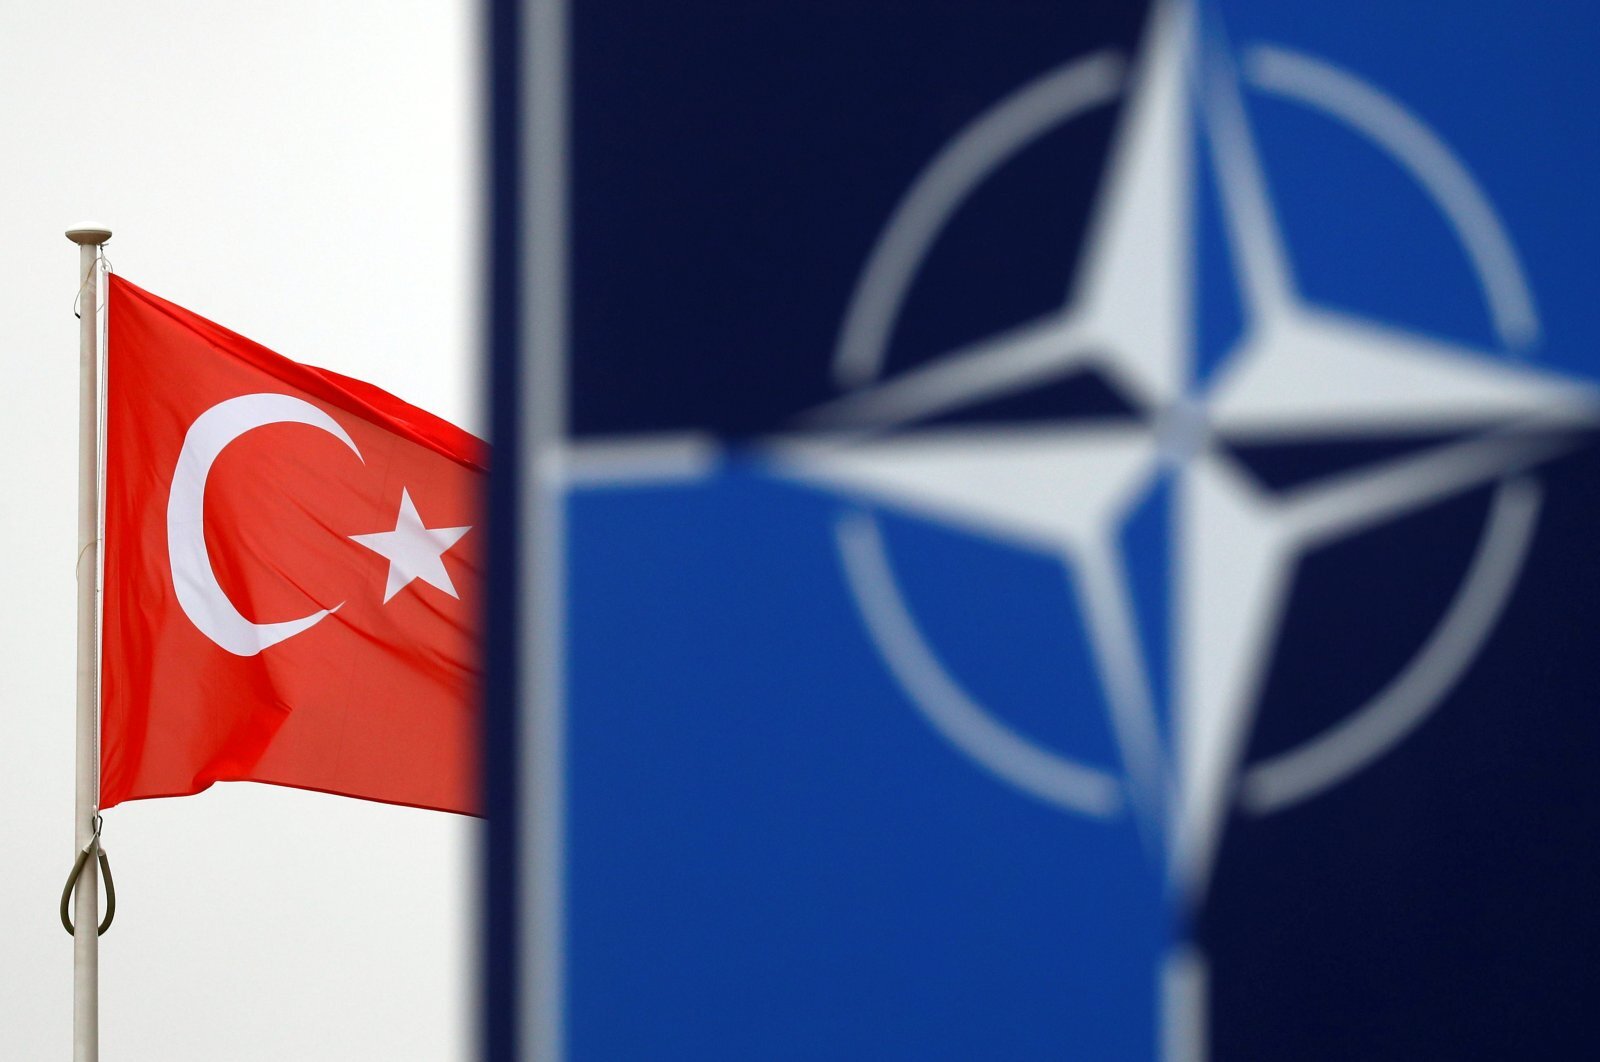 Türkiye among countries with lowest NATO support, survey shows